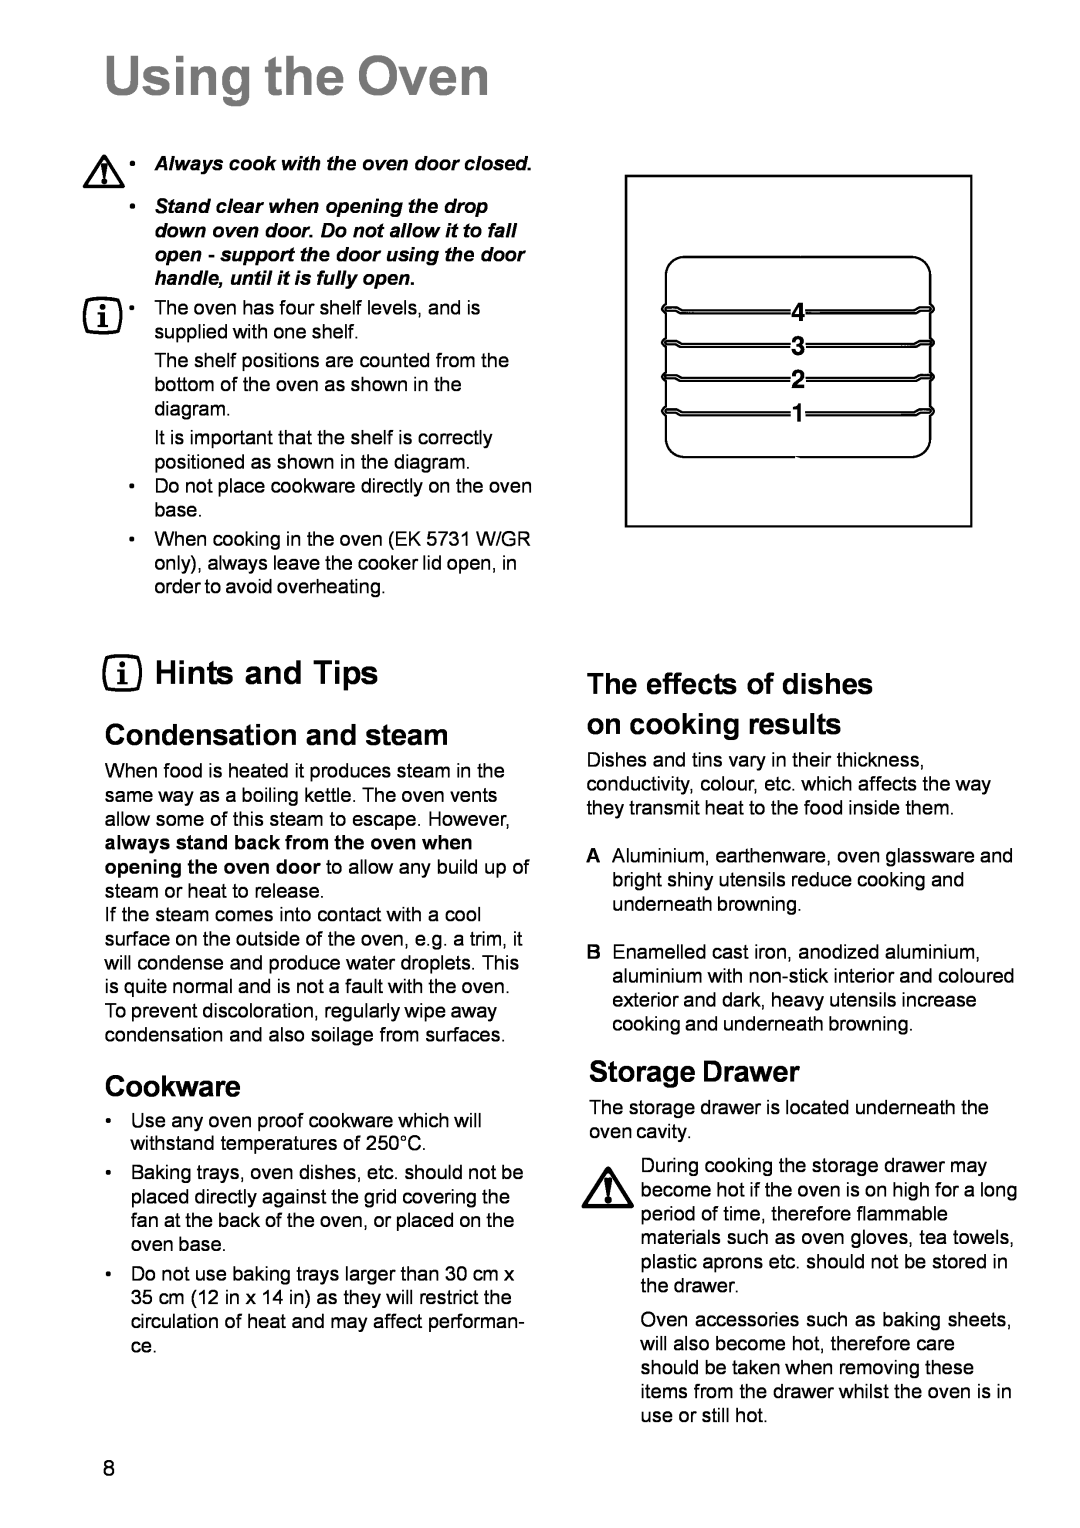 Electrolux EK 5731 manual Using the Oven, Condensation and steam, Cookware, The effects of dishes on cooking results 